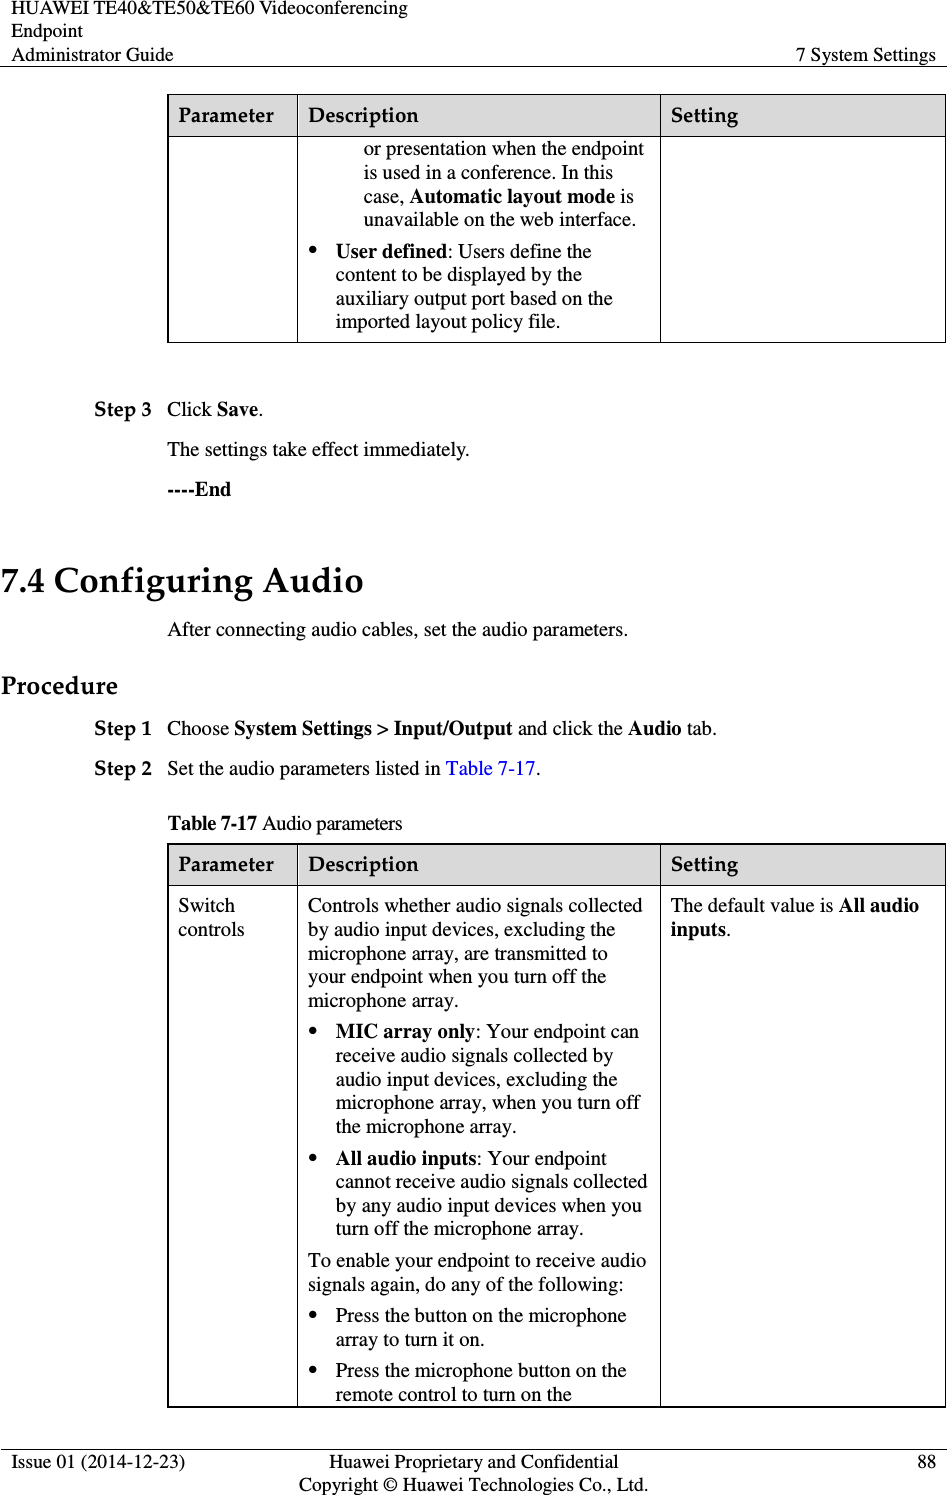 HUAWEI TE40&amp;TE50&amp;TE60 Videoconferencing Endpoint Administrator Guide  7 System Settings  Issue 01 (2014-12-23)  Huawei Proprietary and Confidential                                     Copyright © Huawei Technologies Co., Ltd. 88  Parameter  Description  Setting or presentation when the endpoint is used in a conference. In this case, Automatic layout mode is unavailable on the web interface.    User defined: Users define the content to be displayed by the auxiliary output port based on the imported layout policy file.    Step 3 Click Save. The settings take effect immediately.   ----End 7.4 Configuring Audio After connecting audio cables, set the audio parameters. Procedure Step 1 Choose System Settings &gt; Input/Output and click the Audio tab. Step 2 Set the audio parameters listed in Table 7-17. Table 7-17 Audio parameters Parameter  Description  Setting Switch controls Controls whether audio signals collected by audio input devices, excluding the microphone array, are transmitted to your endpoint when you turn off the microphone array.  MIC array only: Your endpoint can receive audio signals collected by audio input devices, excluding the microphone array, when you turn off the microphone array.    All audio inputs: Your endpoint cannot receive audio signals collected by any audio input devices when you turn off the microphone array.   To enable your endpoint to receive audio signals again, do any of the following:  Press the button on the microphone array to turn it on.  Press the microphone button on the remote control to turn on the The default value is All audio inputs.   